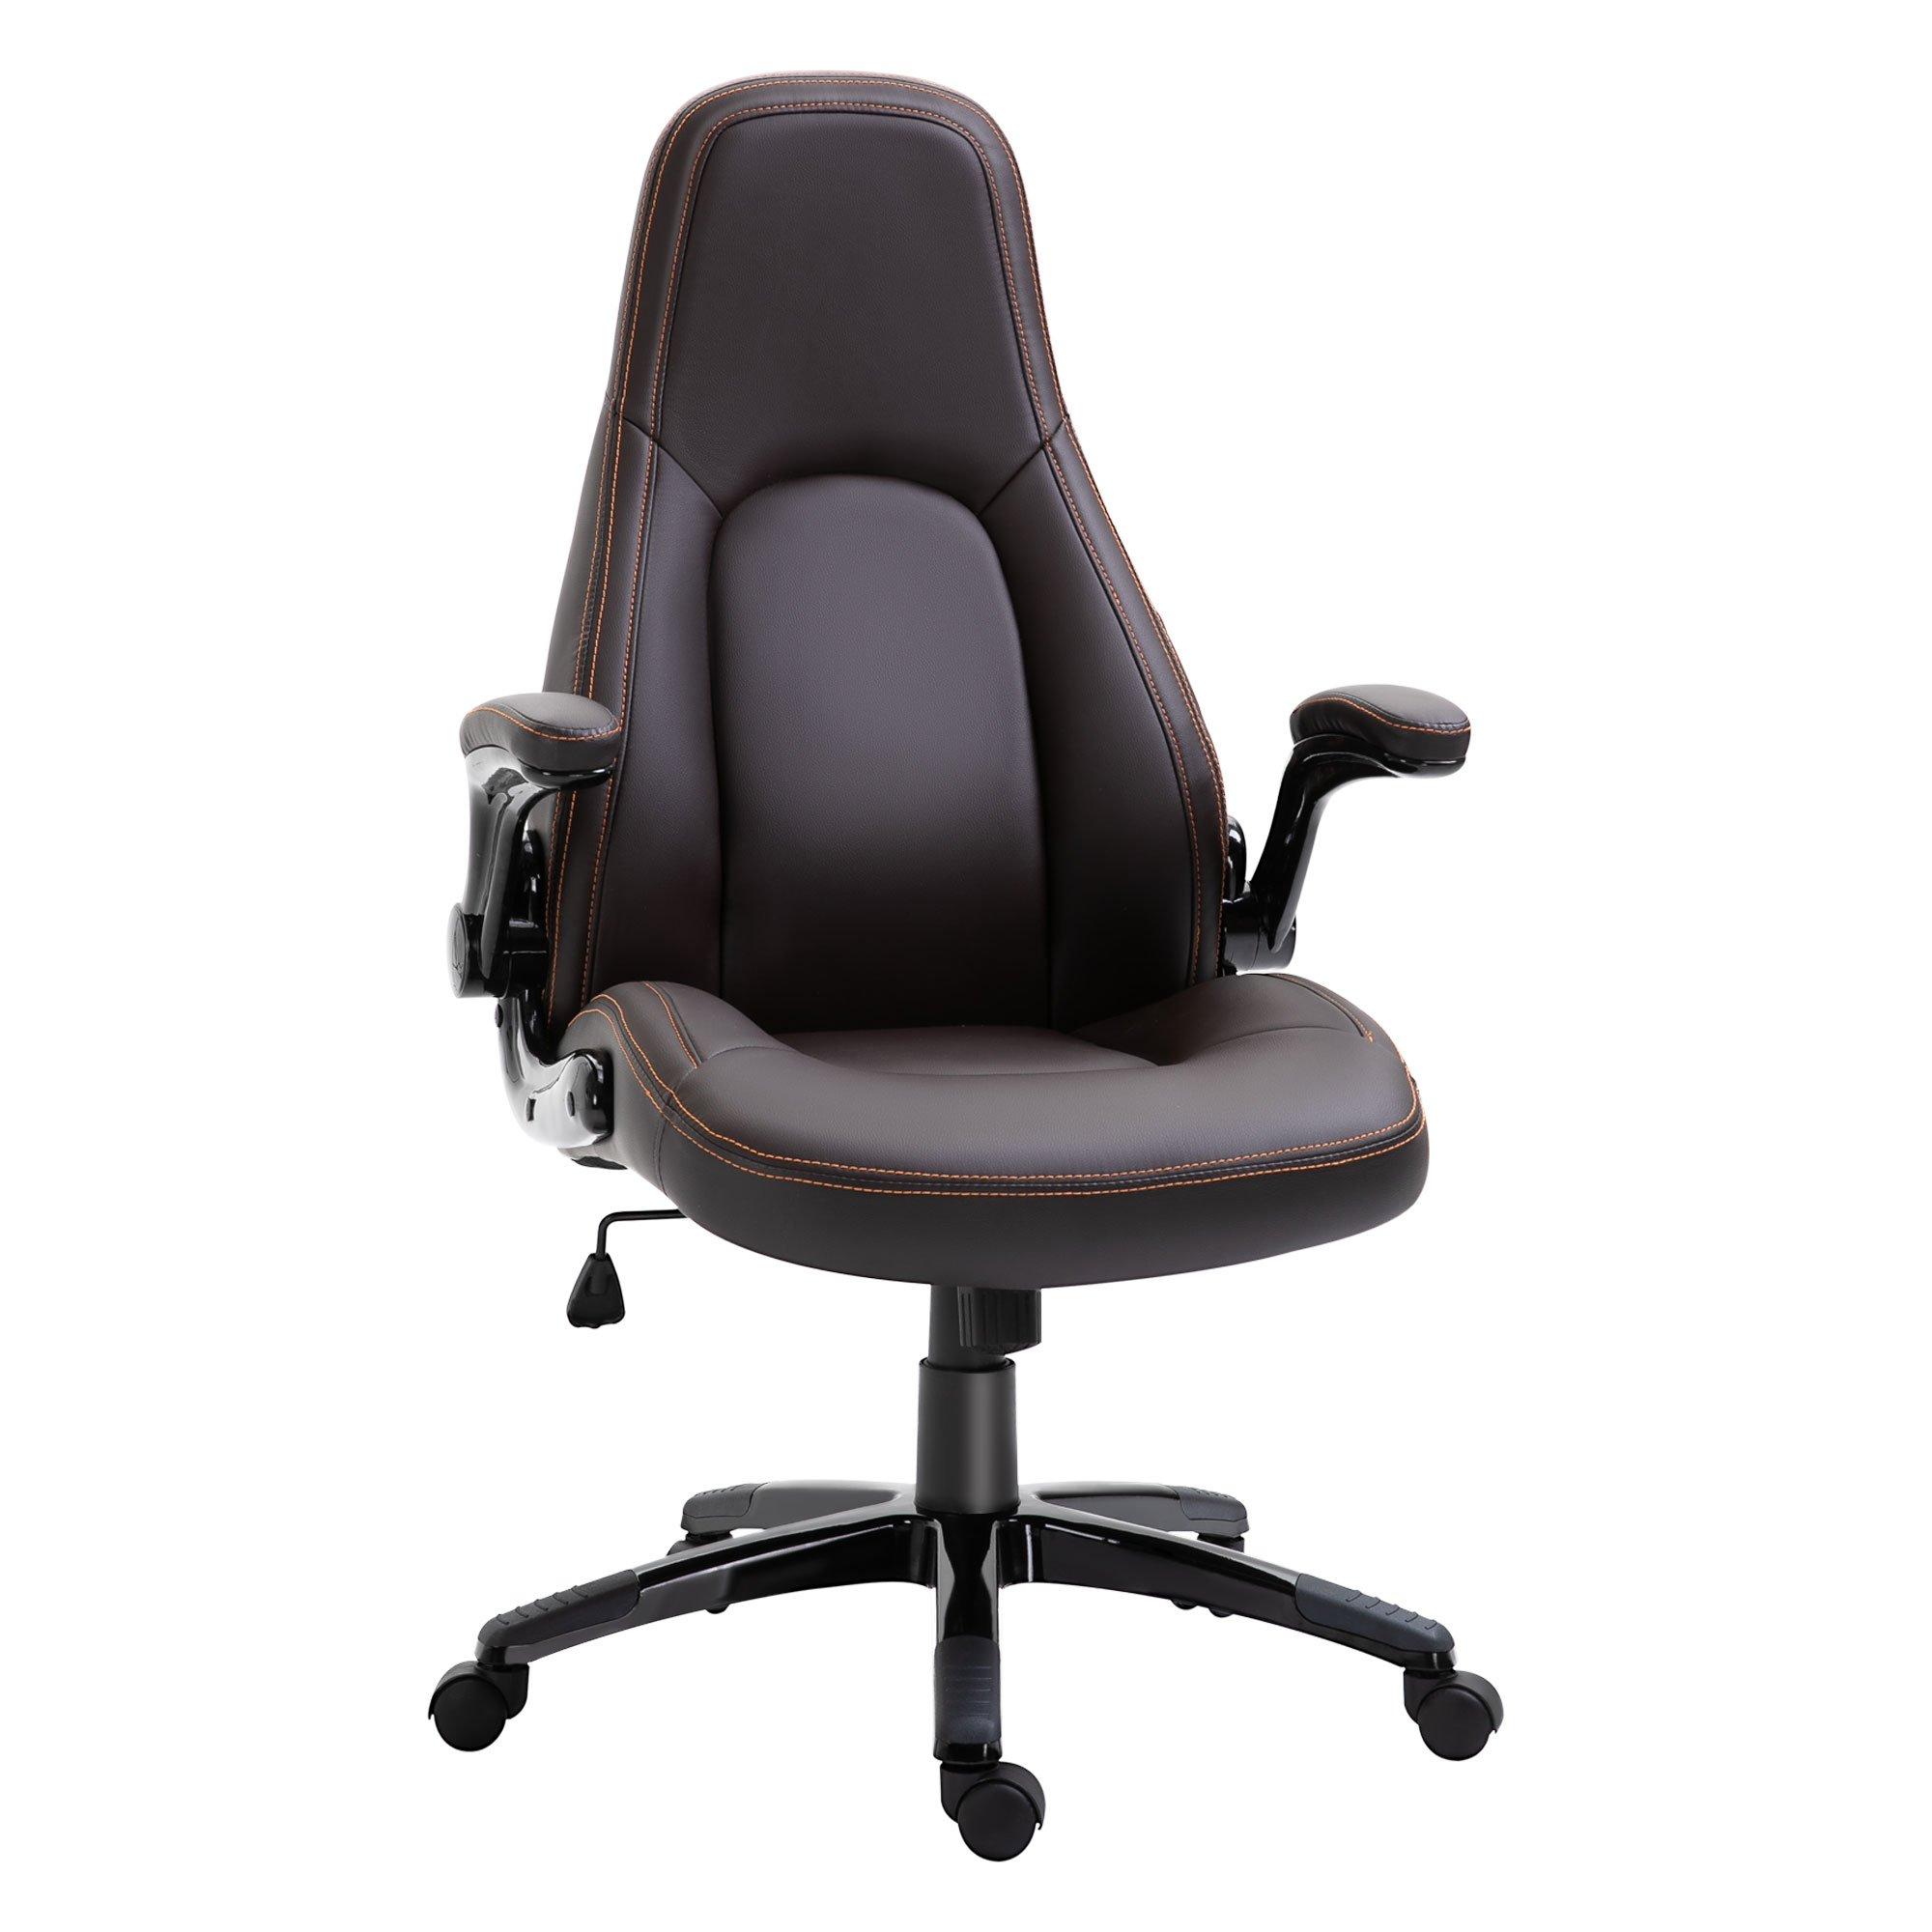 PU Leather Office Chair High Back Swivel Office Chair Adjustable